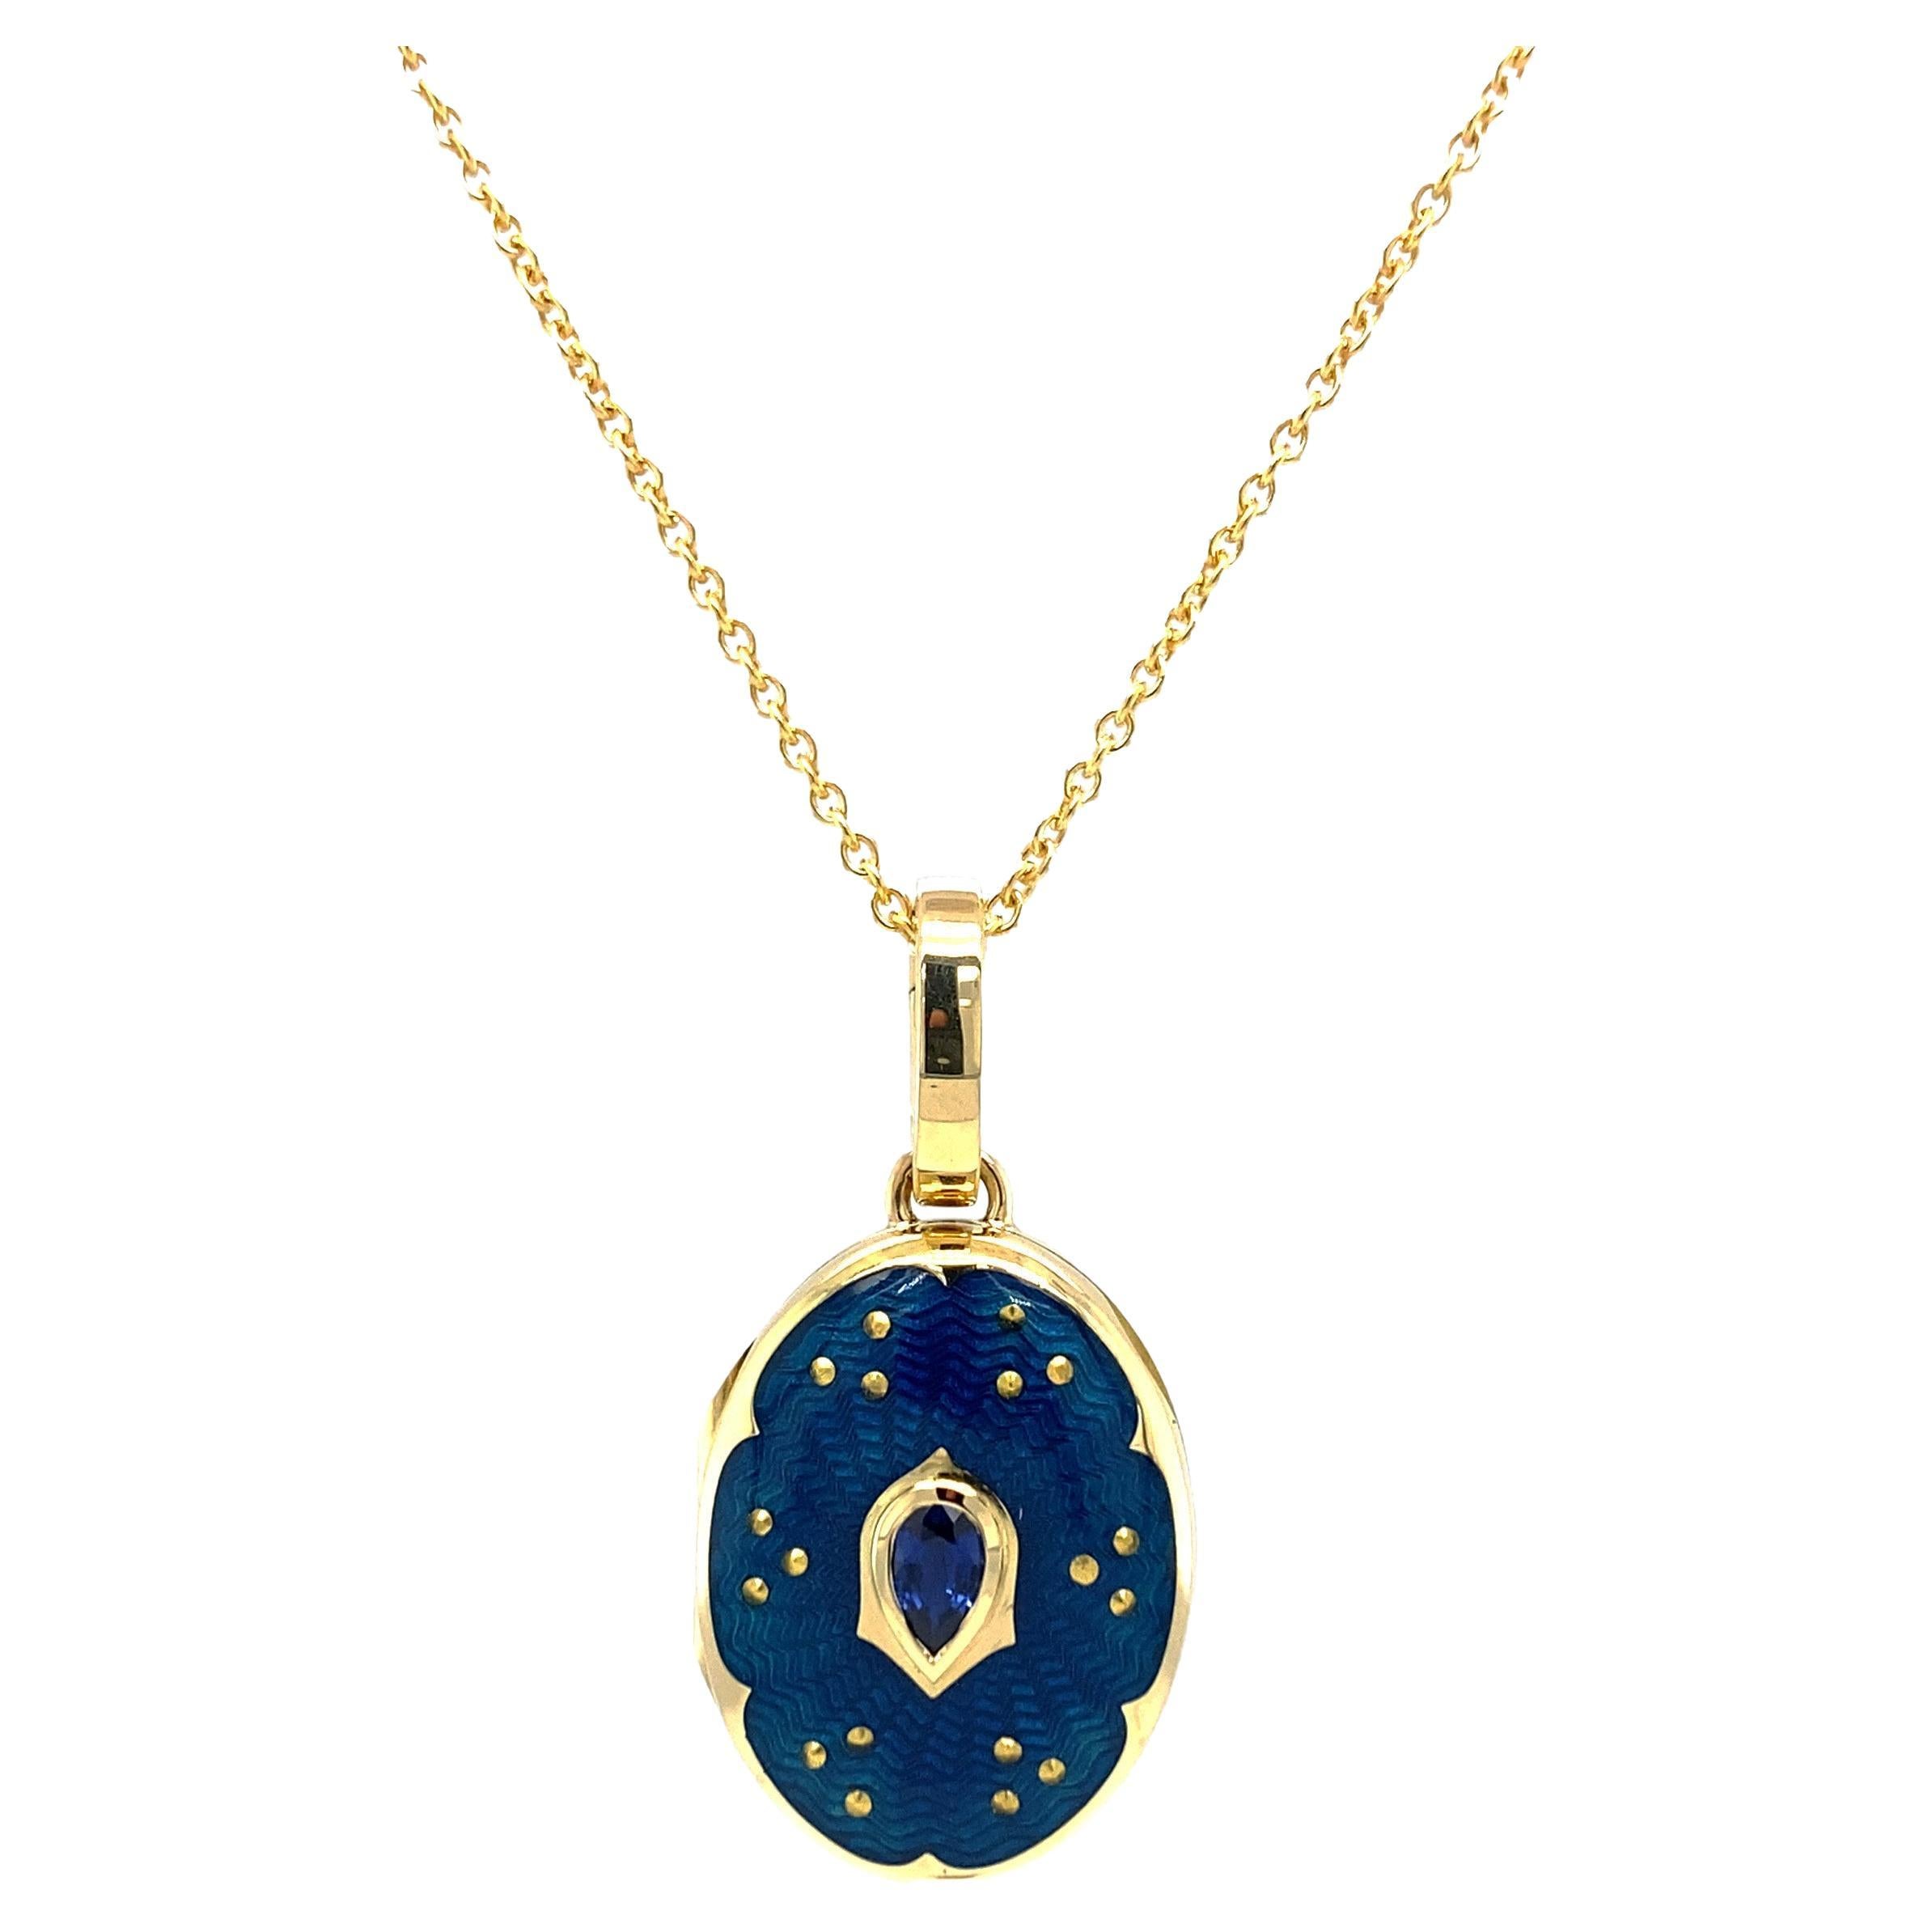 Oval locket pendant necklace, 18k yellow gold, Victoria Collection by Victor Mayer, petrol blue vitreous enamel with paillon inlays, 1 facetted pear shaped sapphire, measurements app. 20.0 mm x 15.0 mm, 45 cmm. 

About the creator Victor